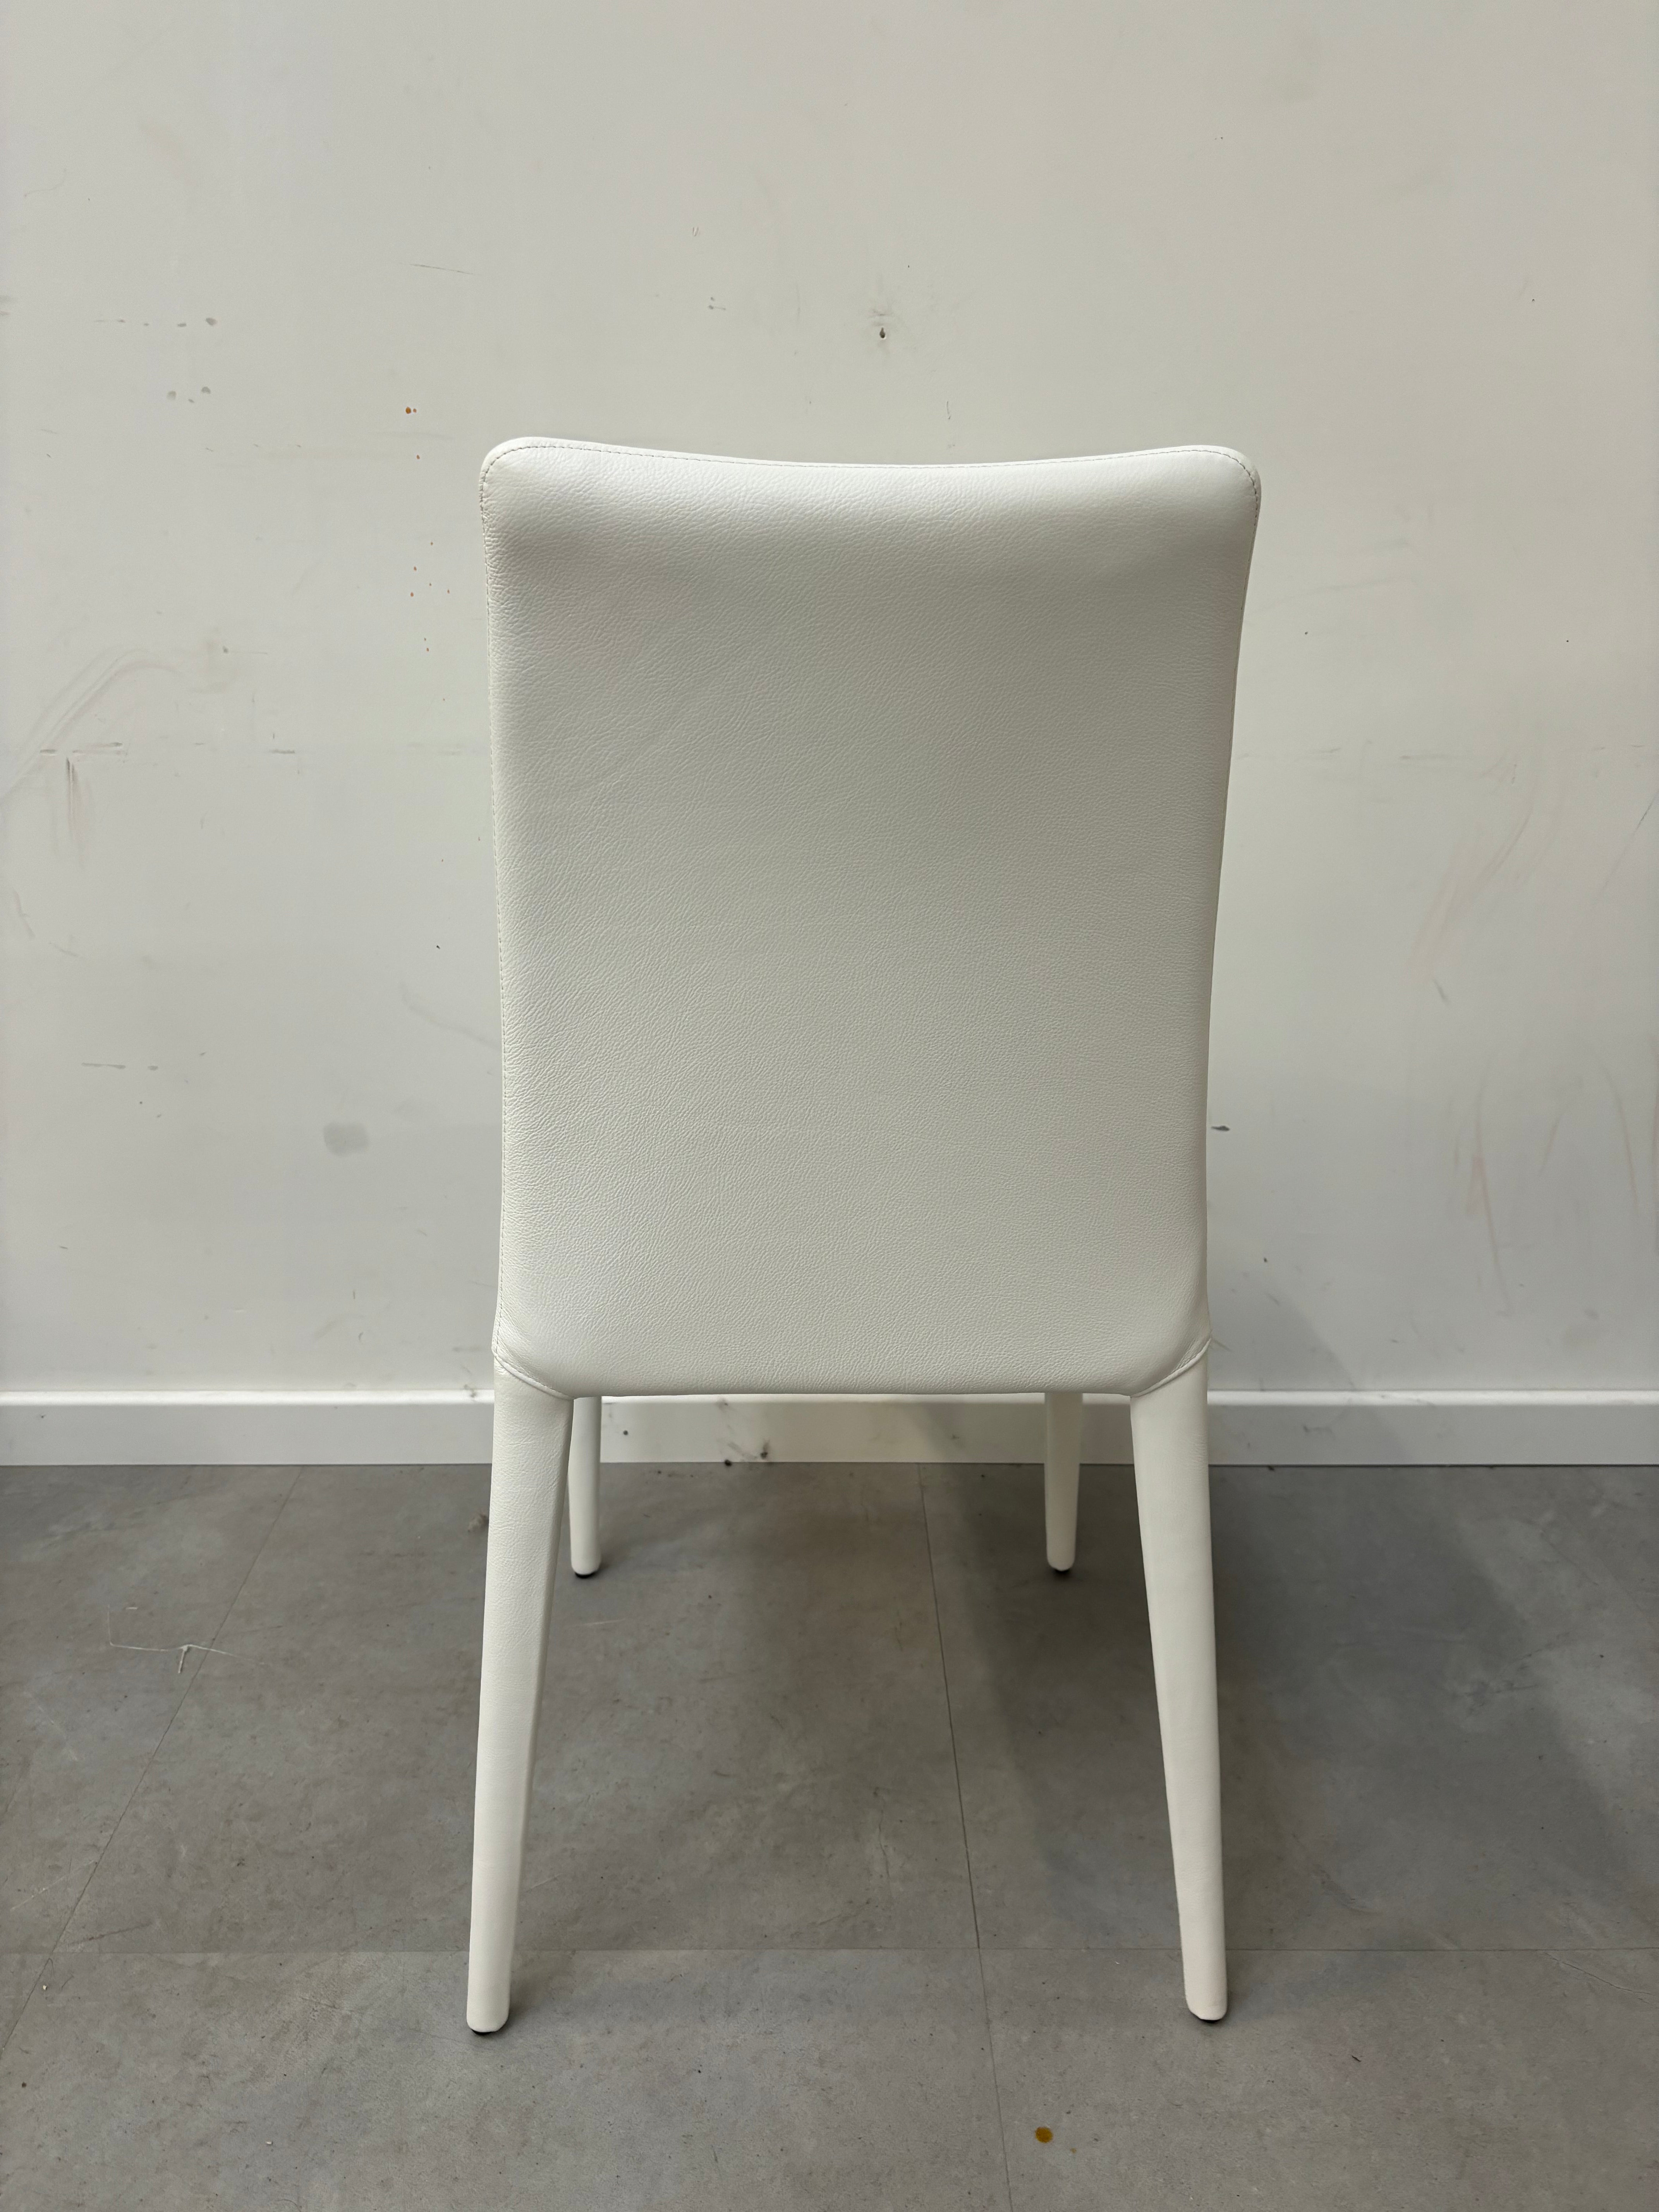 Set of six all white leather chairs